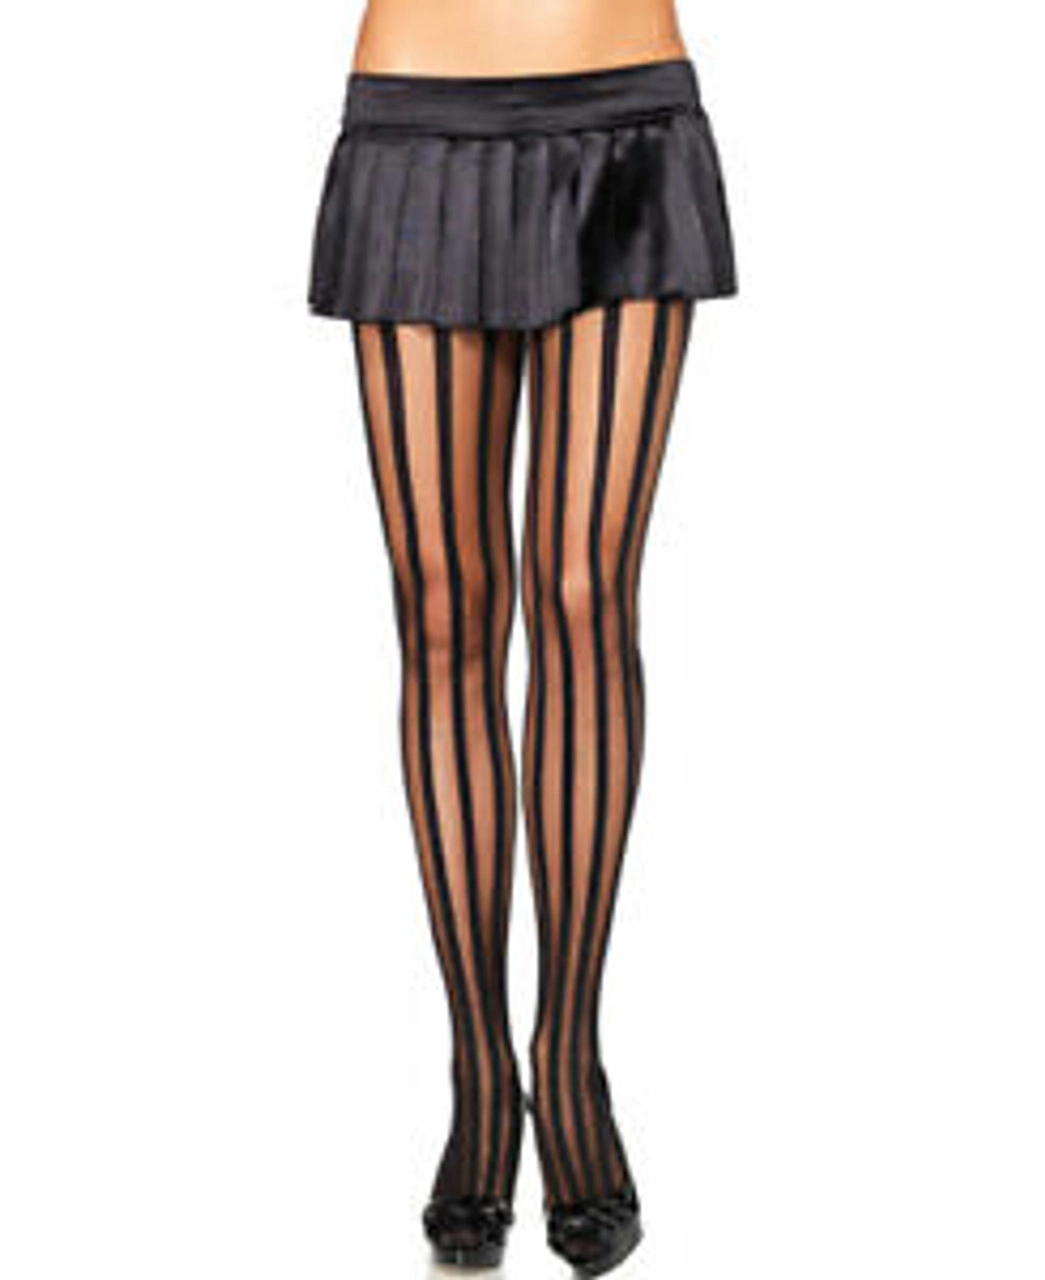 SHEER TIGHTS WITH OPAQUE VERTICAL STRIPES - BLACK (ADULT - ONE SIZE)